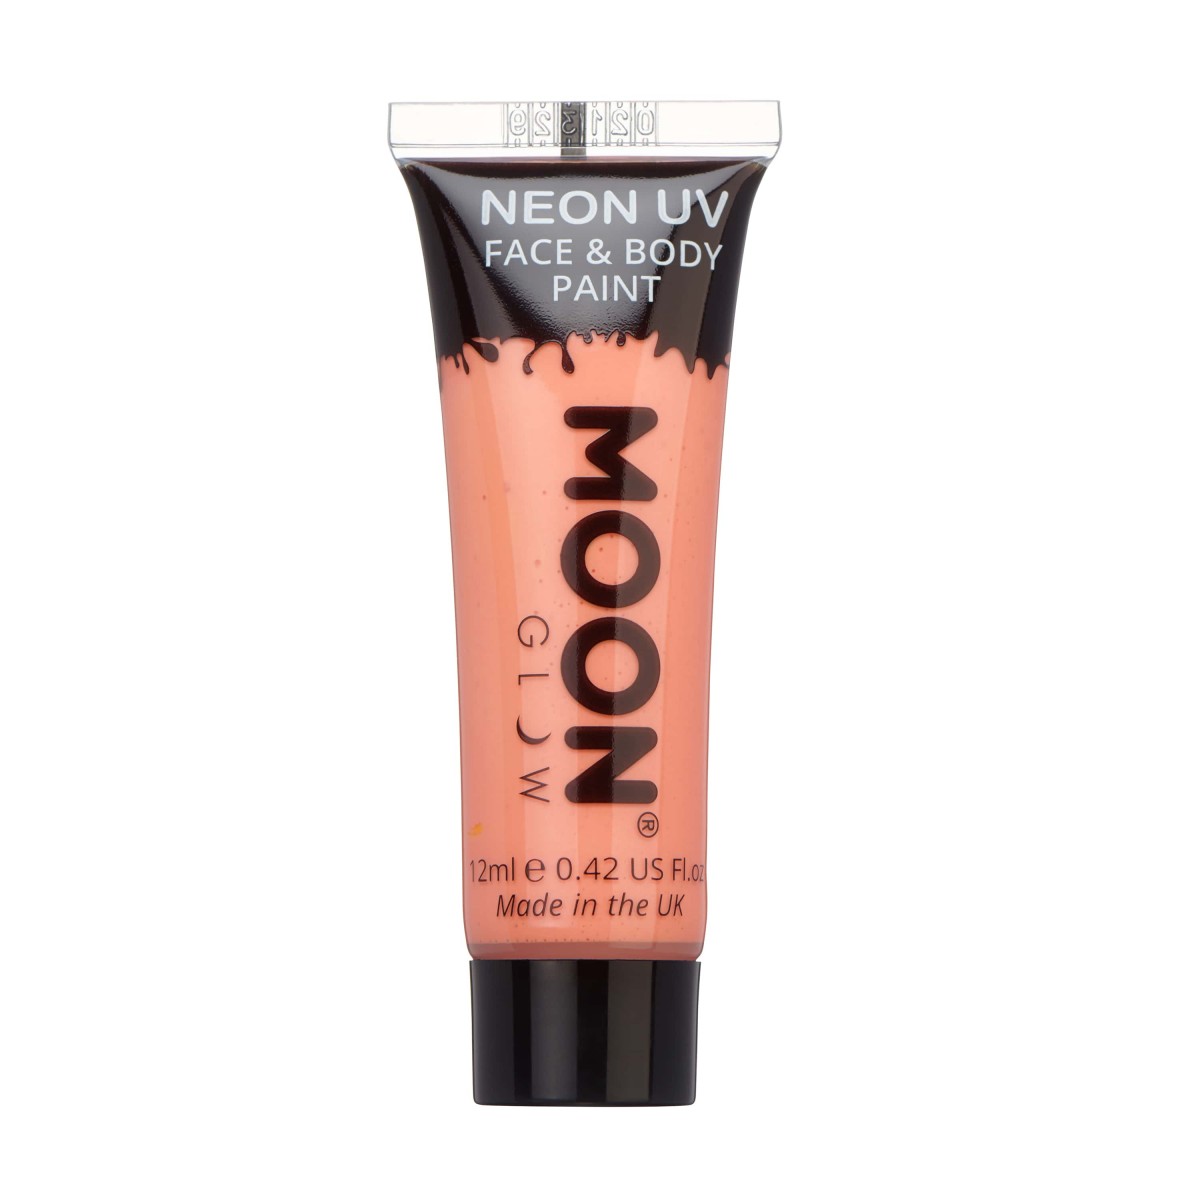 MOON CREATIONS M4 PASTEL NEON UV FACE & BODY PAINT CORAL 12ml